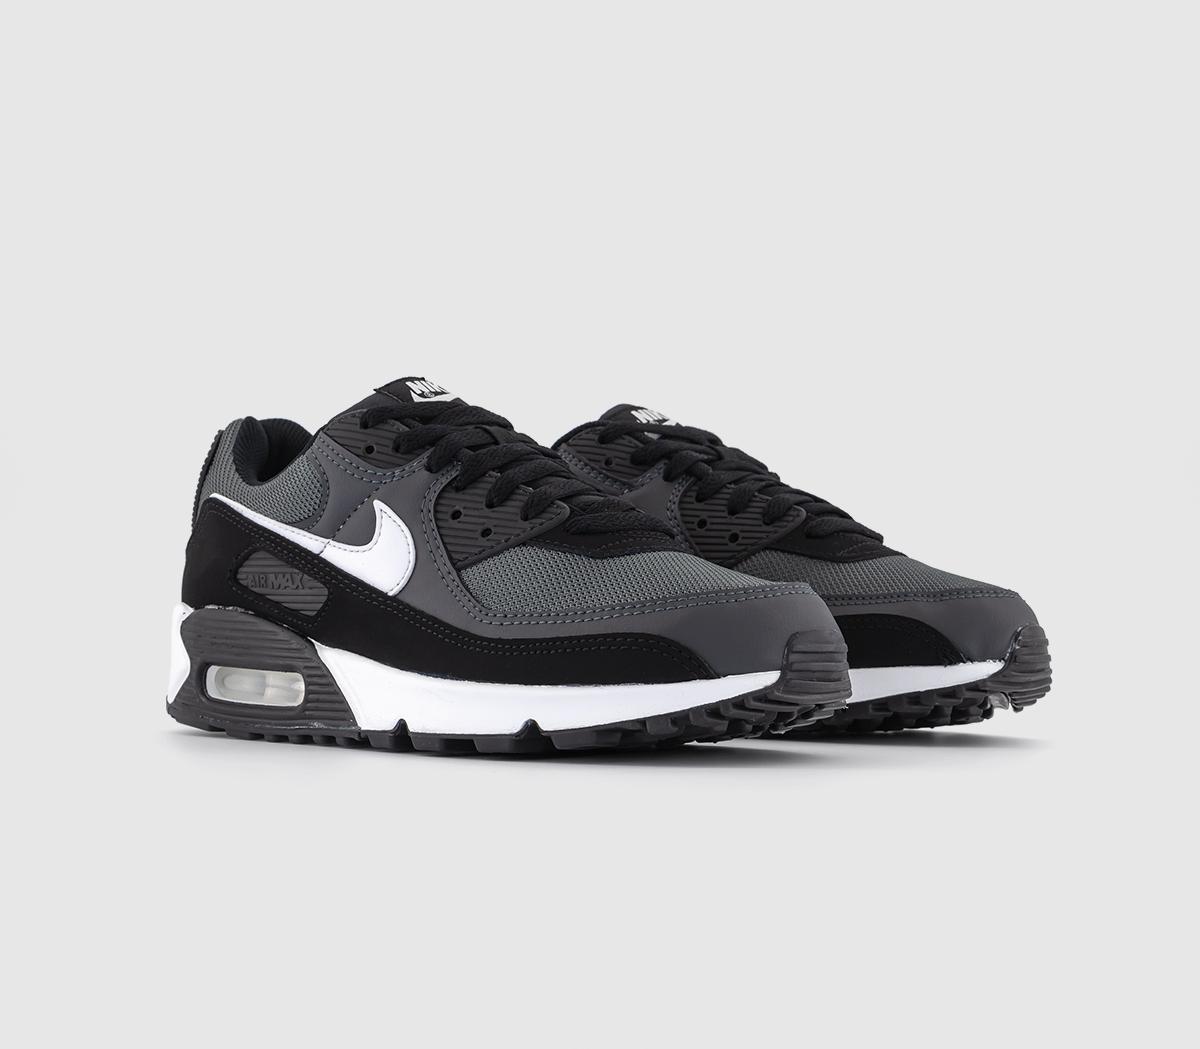 Nike Air Max 90 Trainers Black White Leather His Trainers